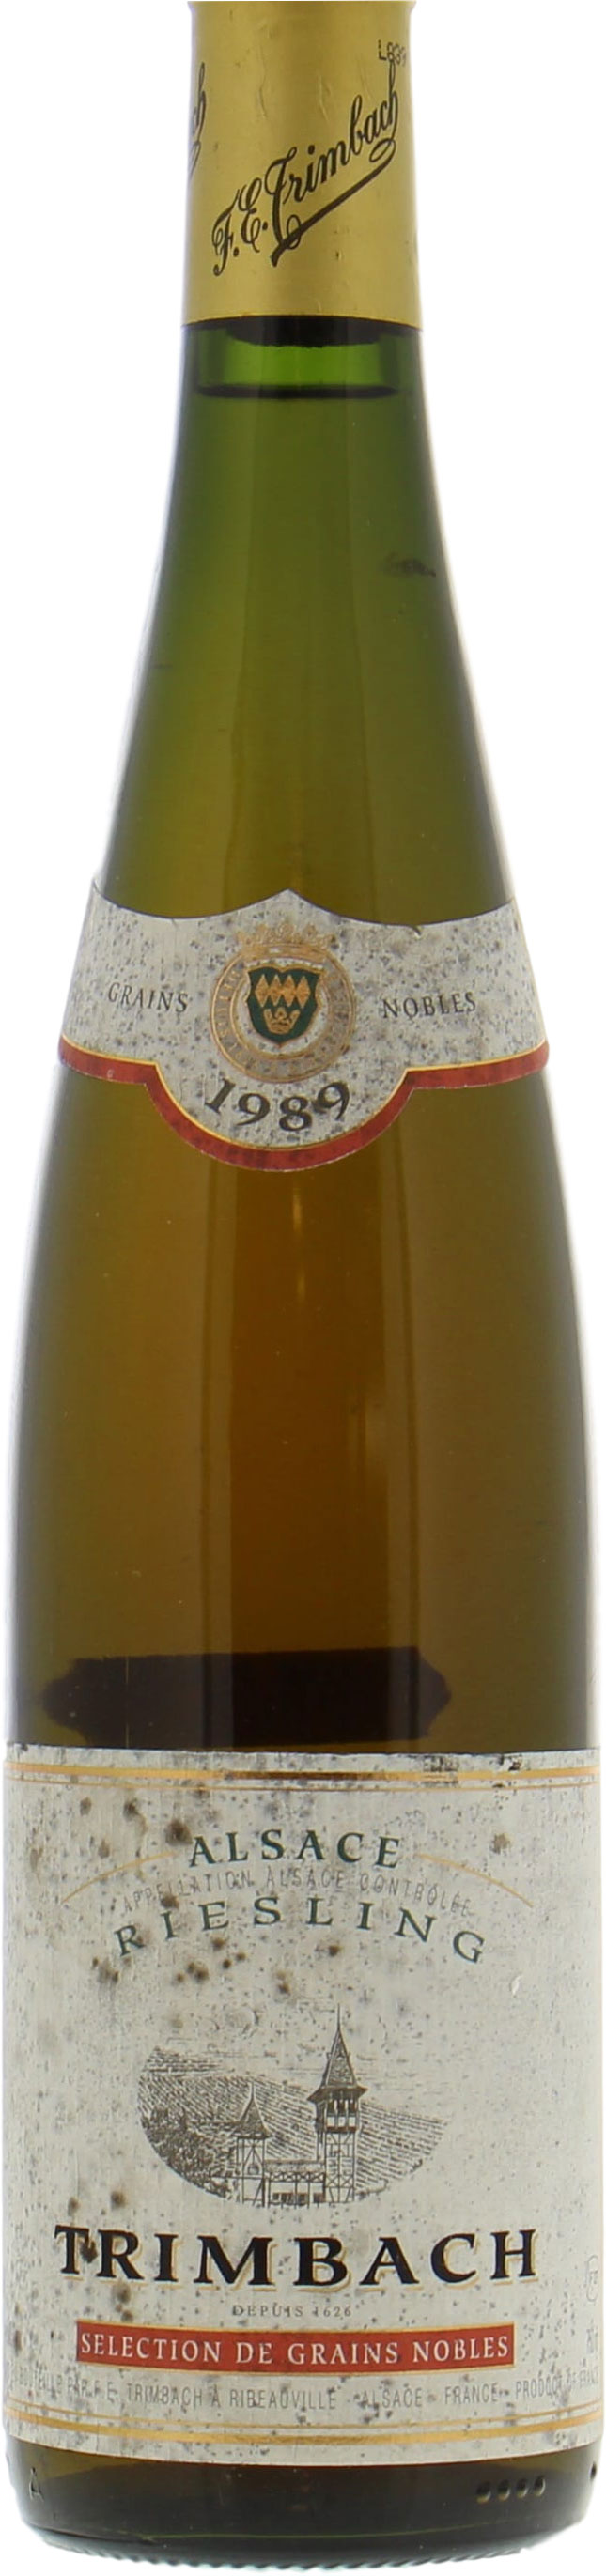 Trimbach - Riesling Cuvee Frederic Emile Selection Grains Nobles 1989 Perfect